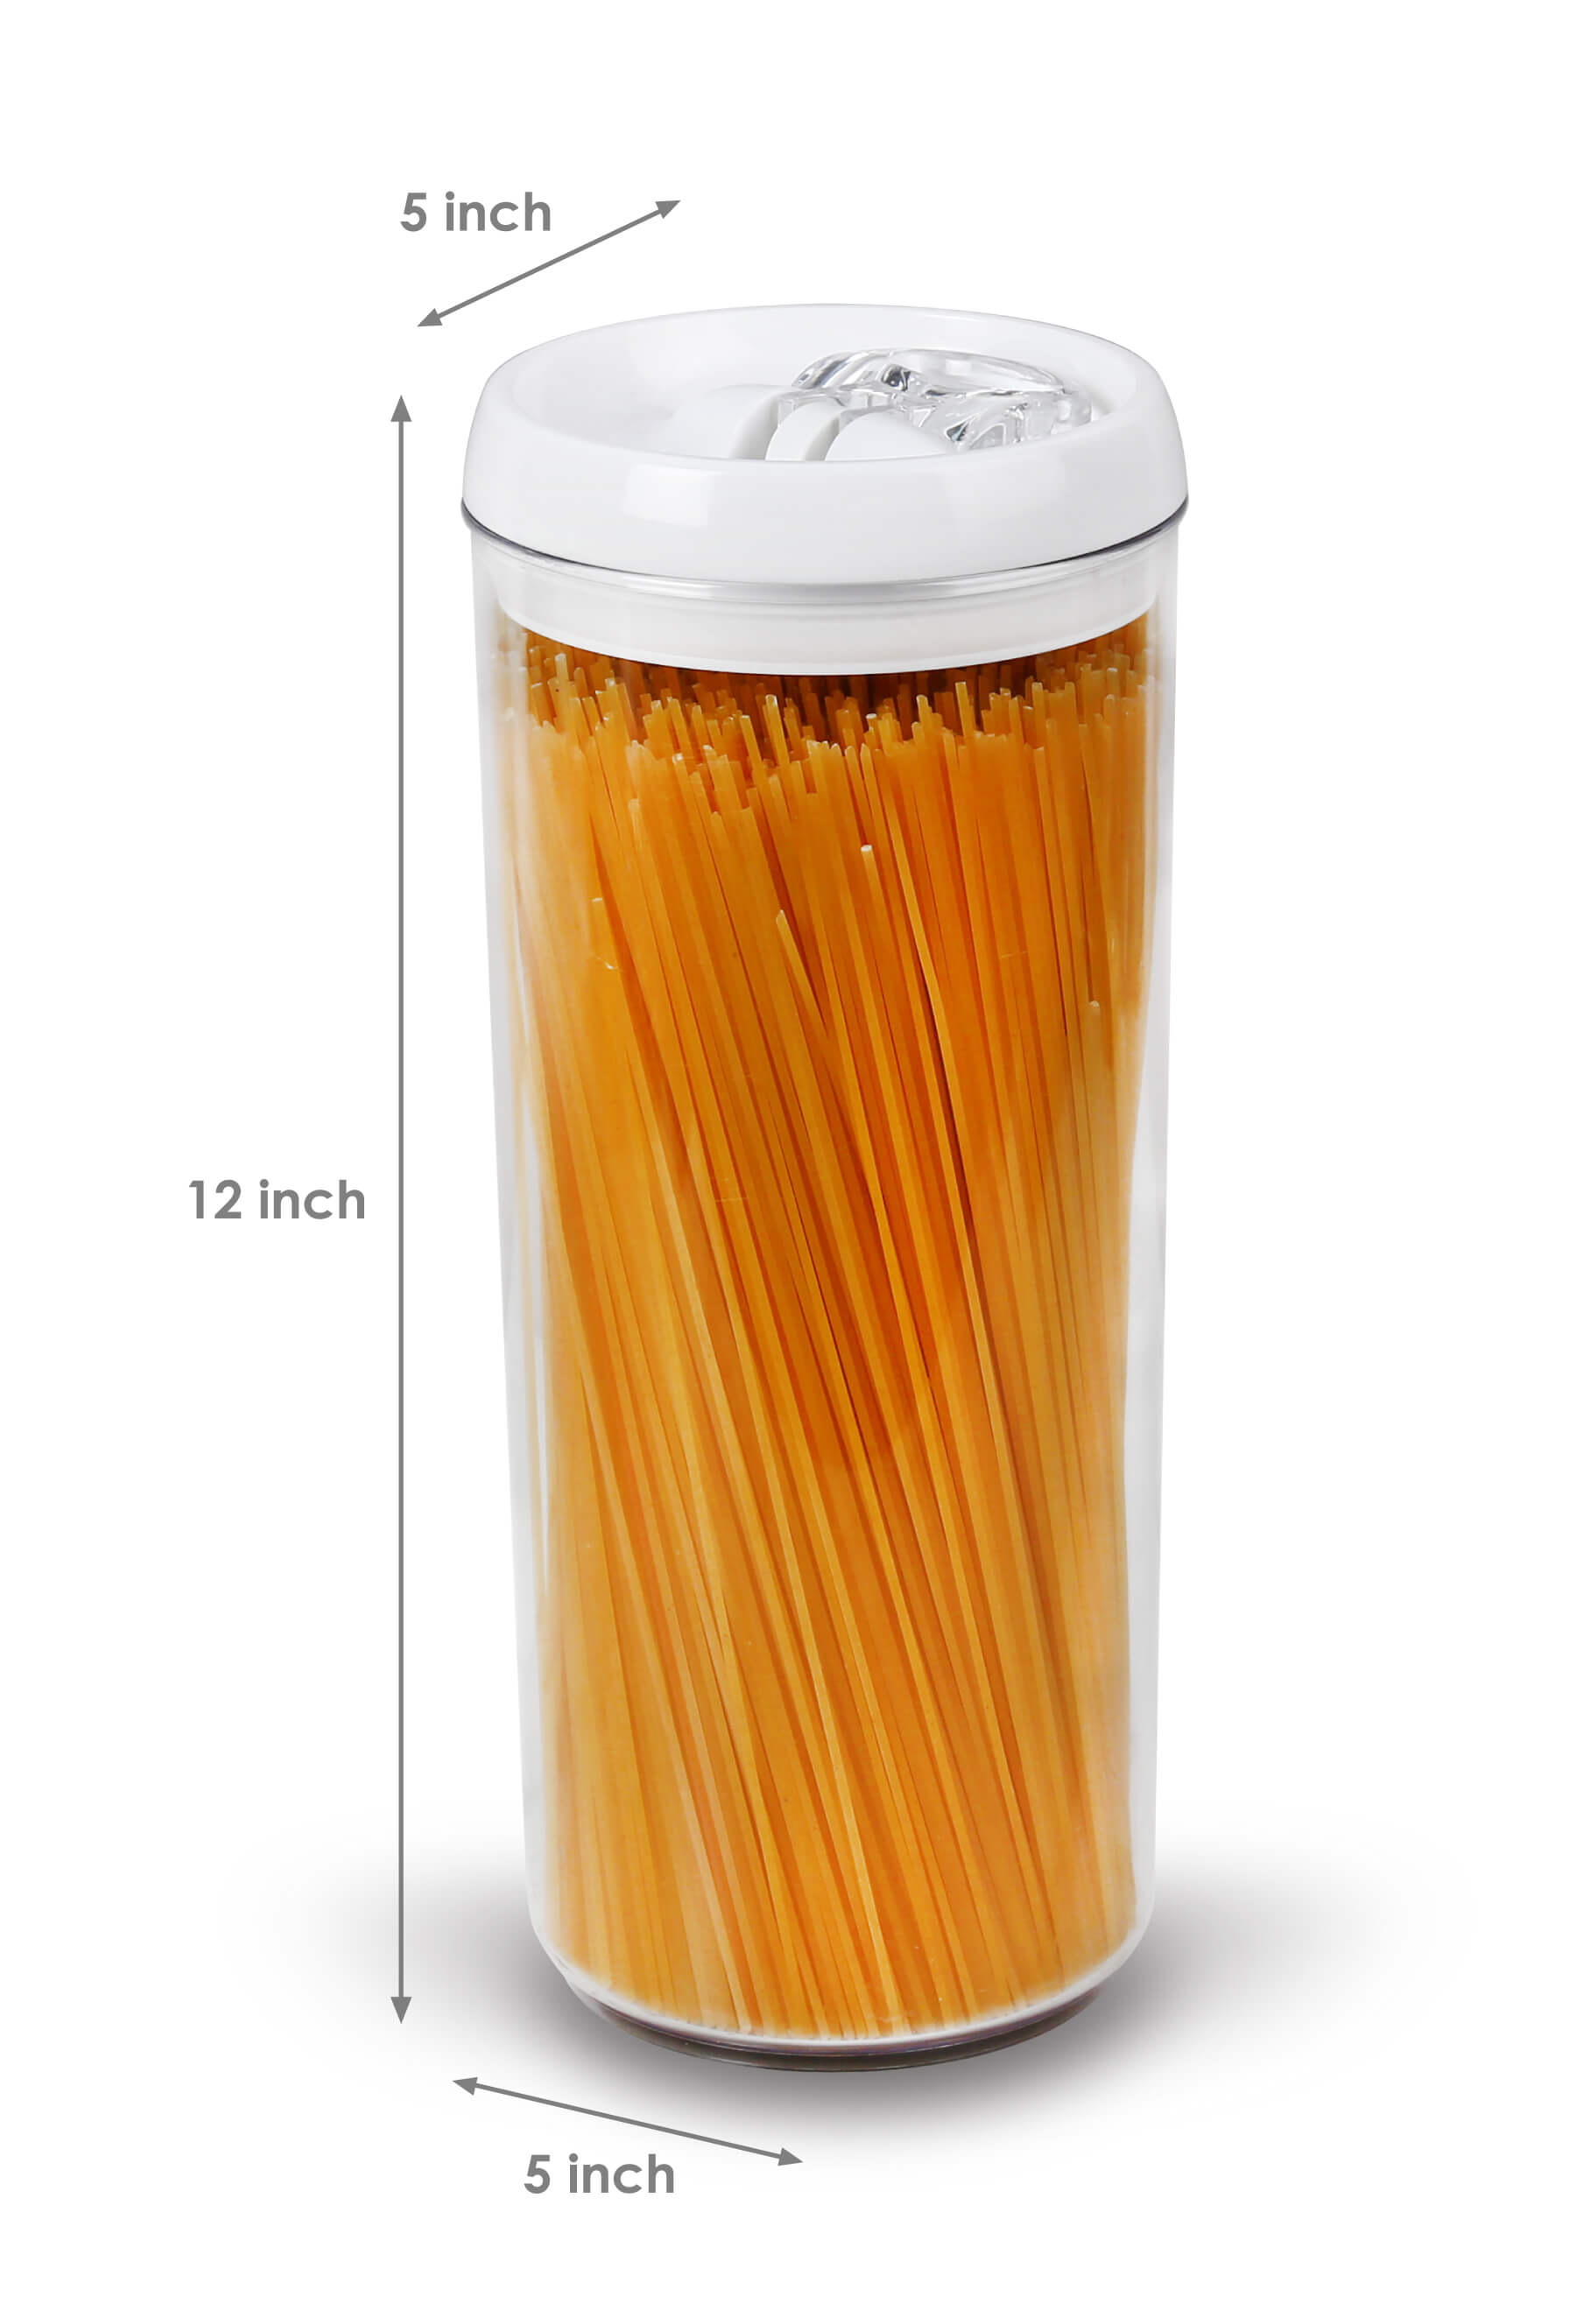 Felli Flip Tite Food Storage Container 5” LARGE Air Tight Lid Easy Lock Top  Plastic Kitchen Canister Jar for Pantry Brown Sugar Flour Rice Grain